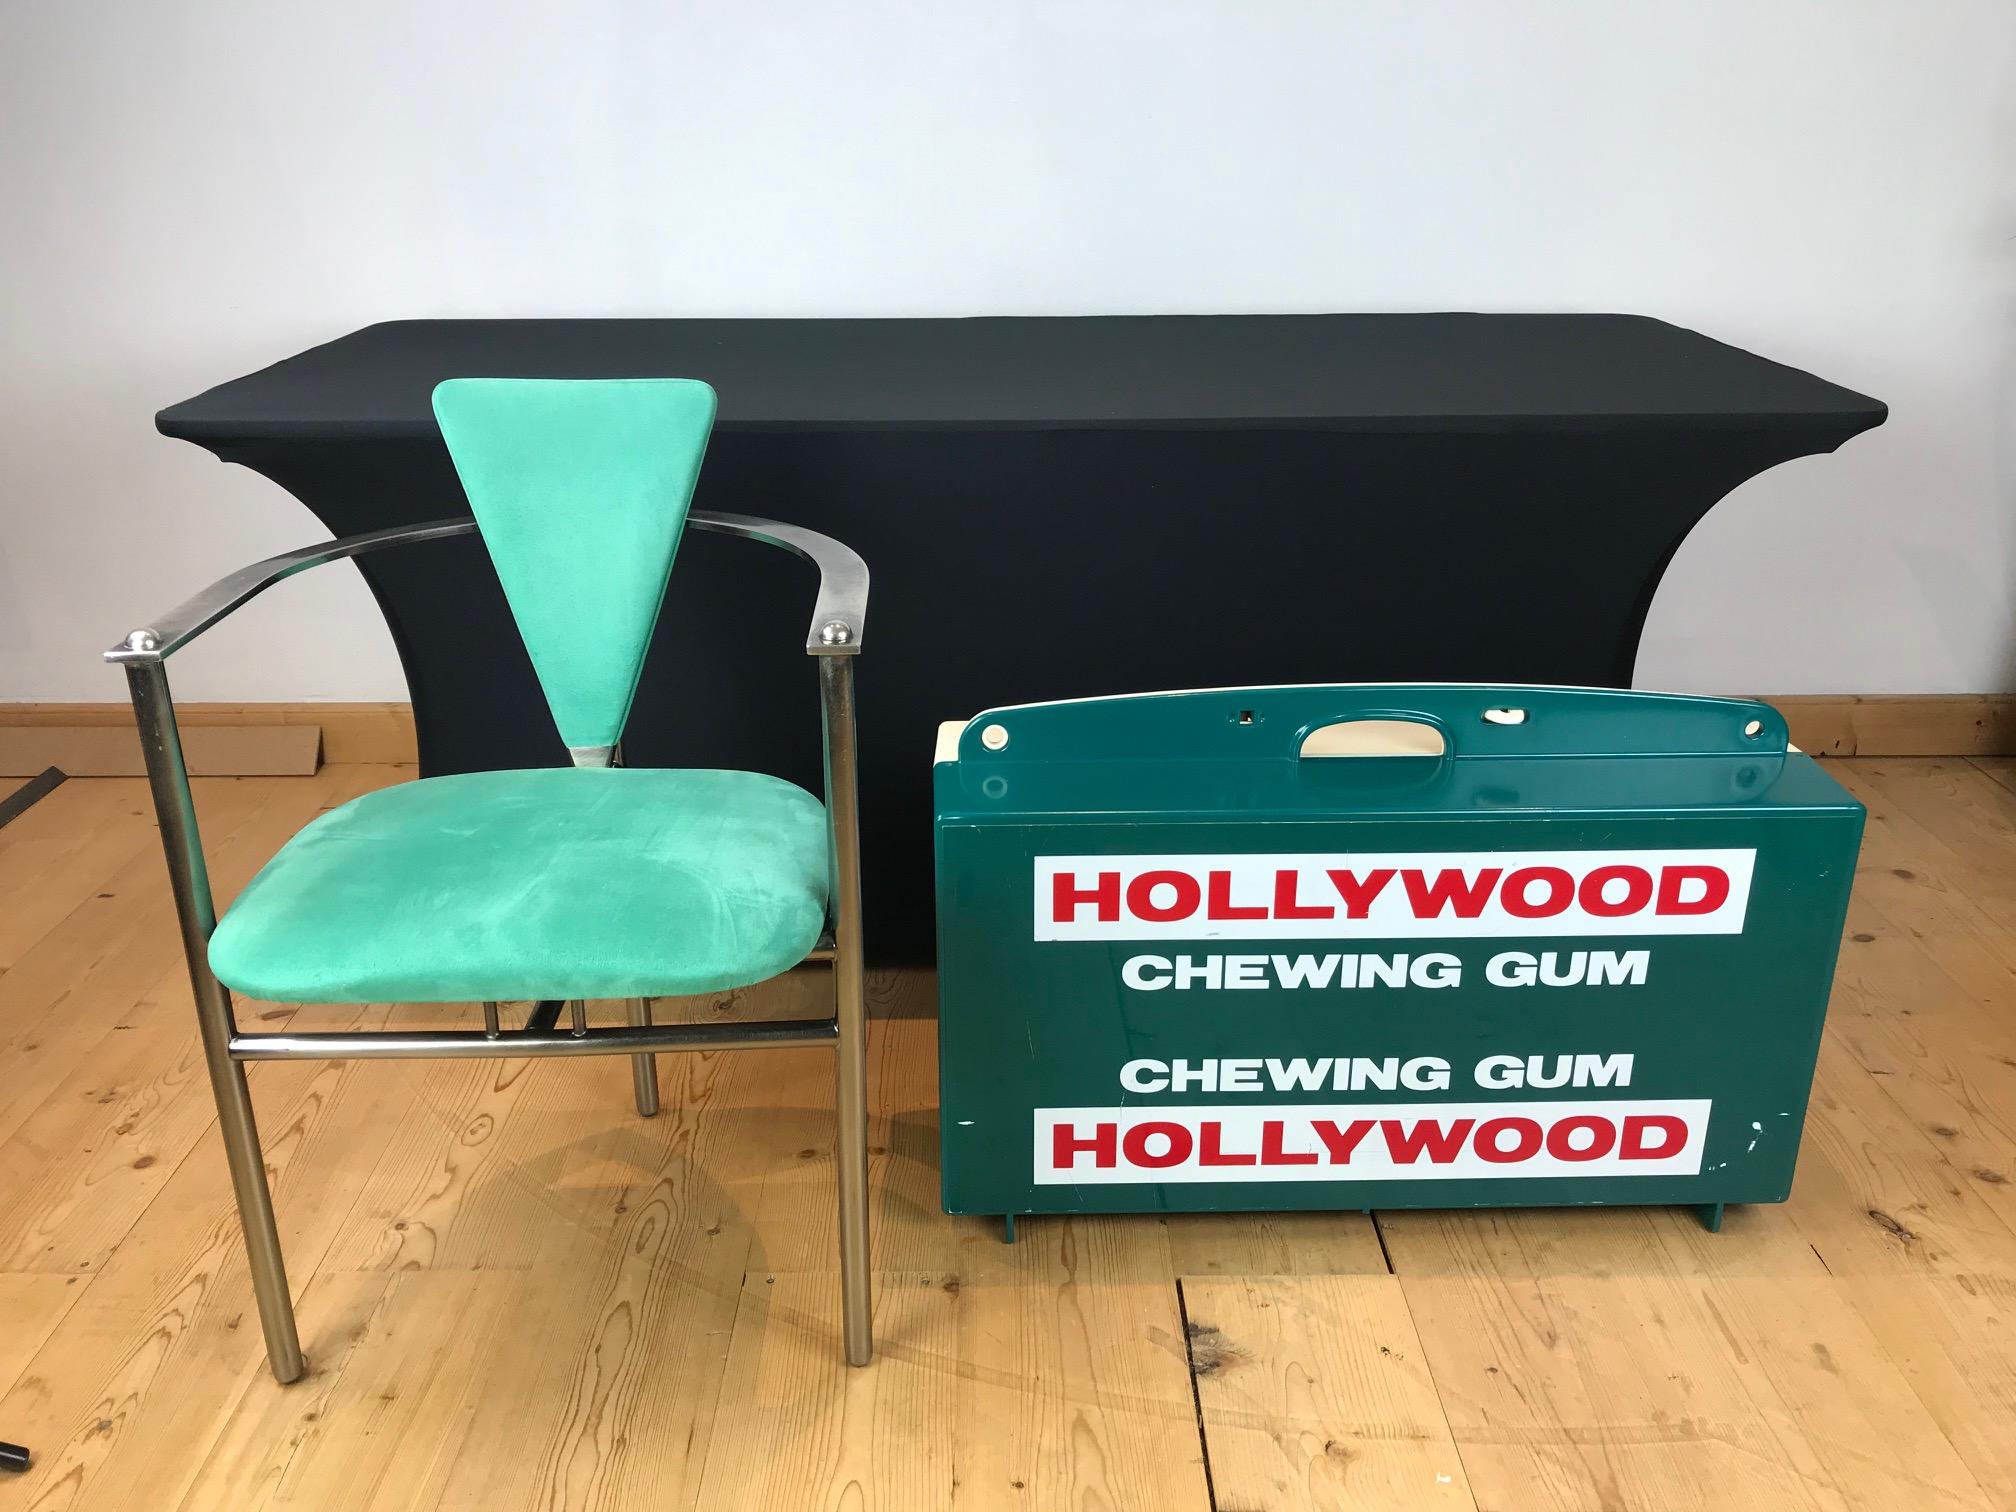 Vintage original Hollywood Chewing Gum display suitcase - Advertising display.
This Large suitcase for the French brand of Hollywood Chewing Gum, since 1958, is made of thick hard plastic. You can open this heavy trunk ( 27,11 lbs or 12,3 kg ) and